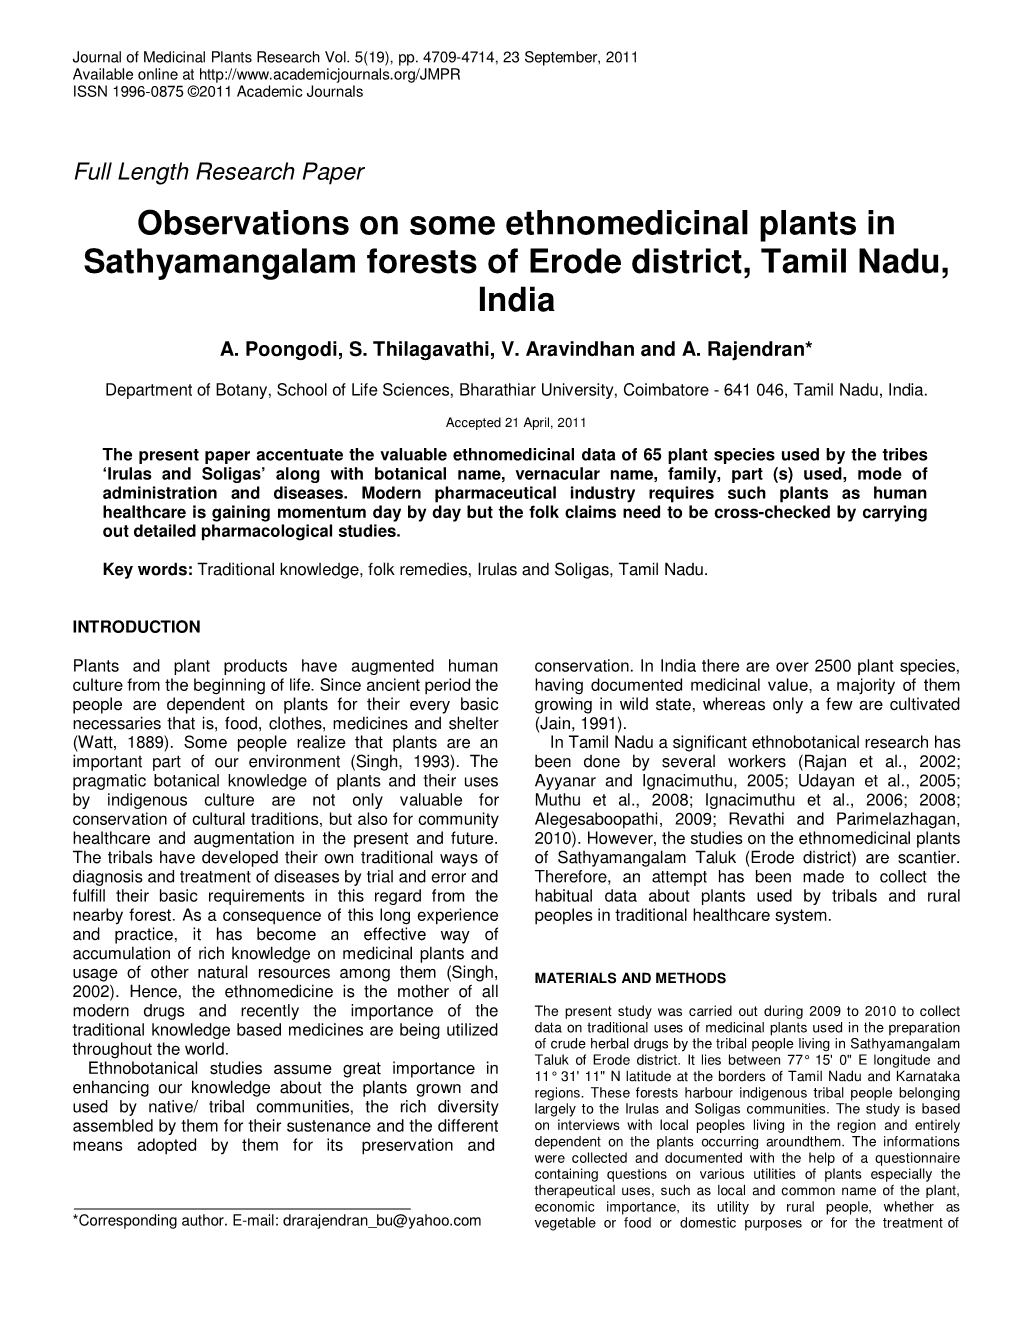 Observations on Some Ethnomedicinal Plants in Sathyamangalam Forests of Erode District, Tamil Nadu, India